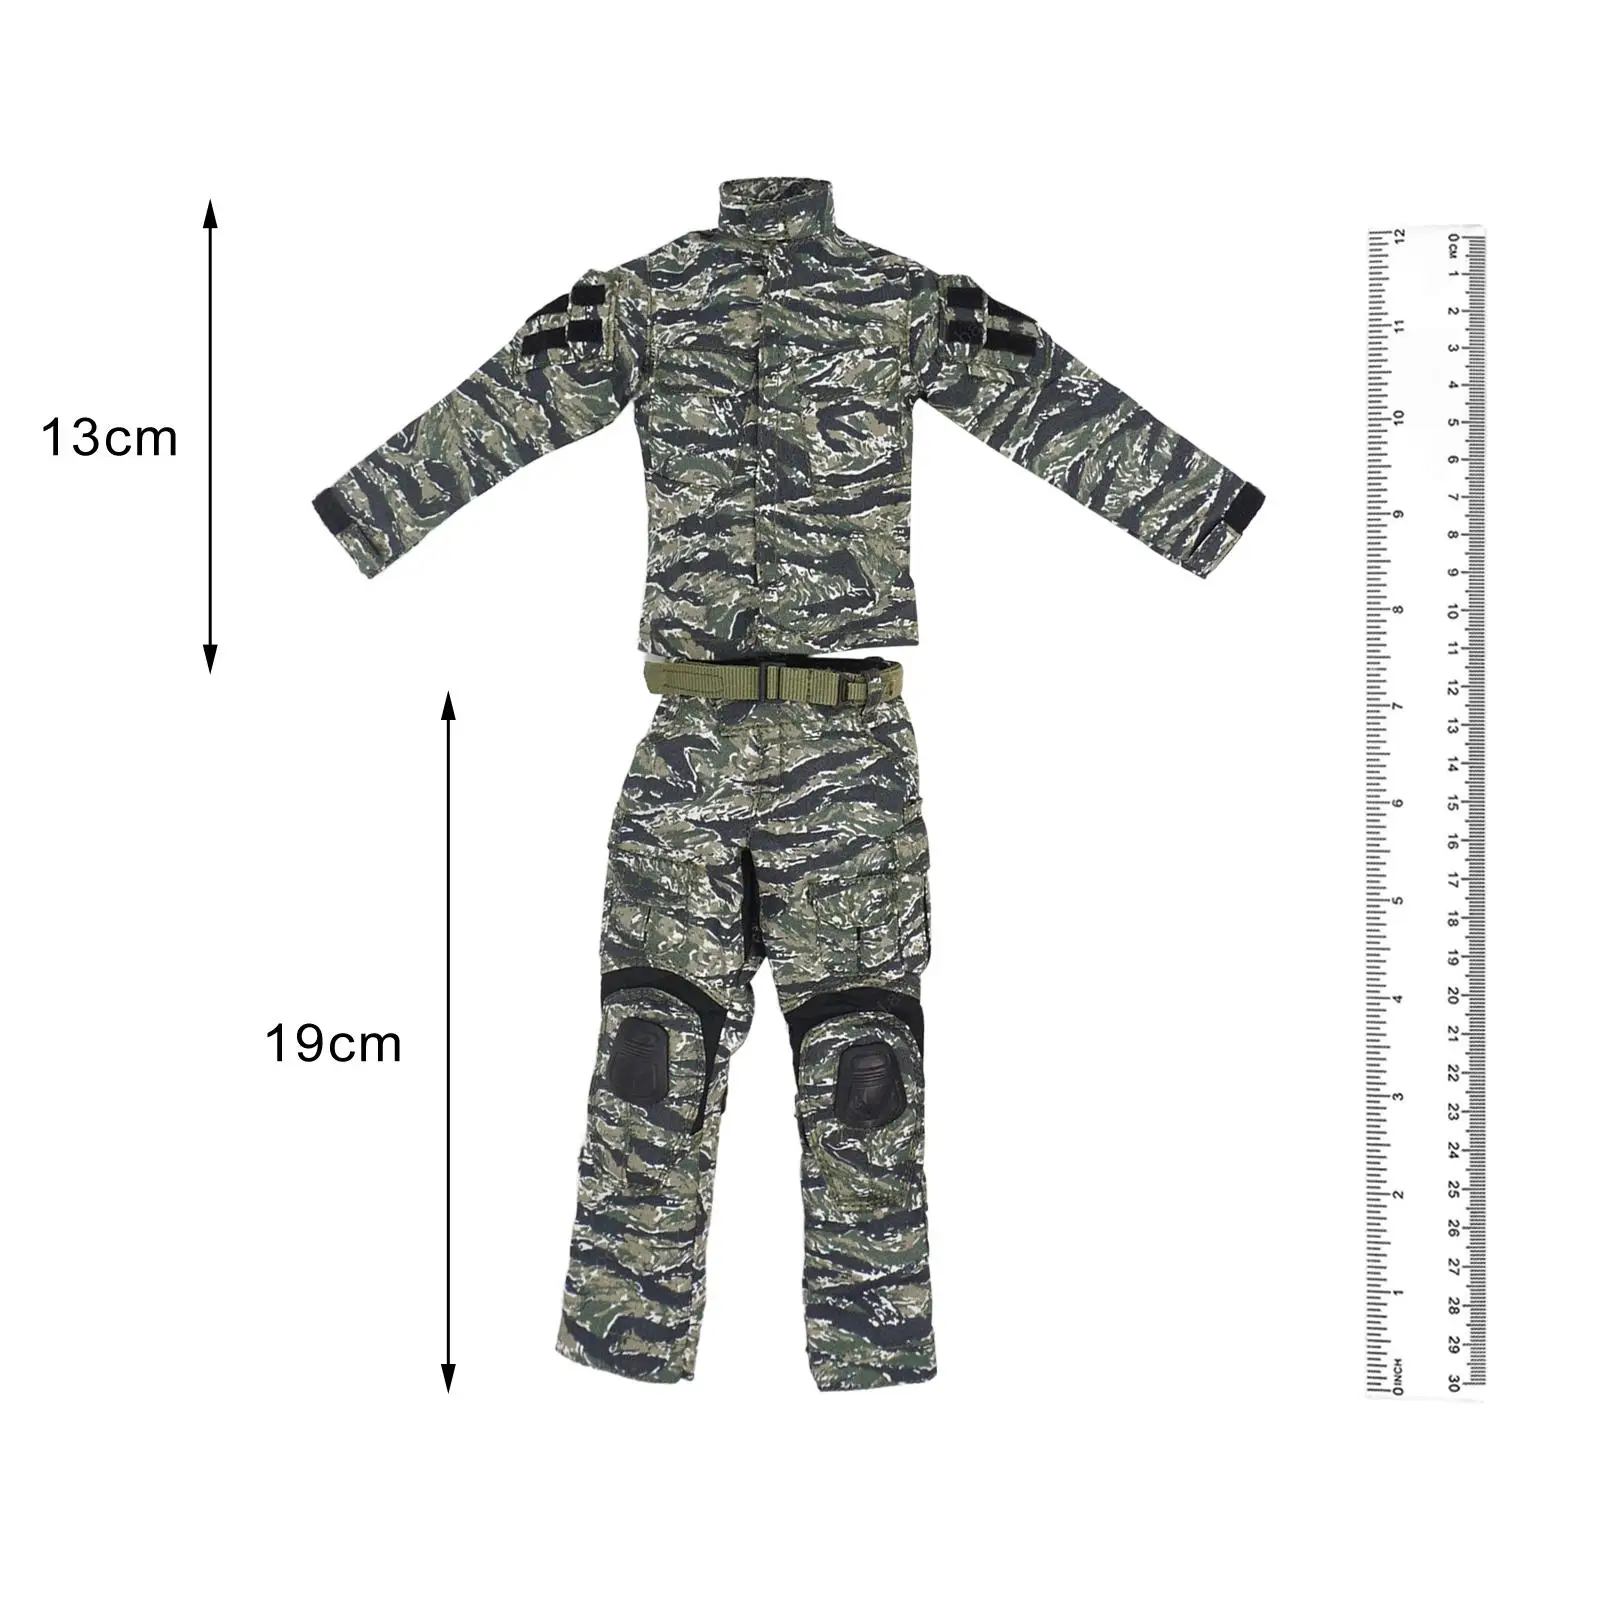 1/6 Scale Male Figure Doll Clothes for 12inch Male Figures Accessories